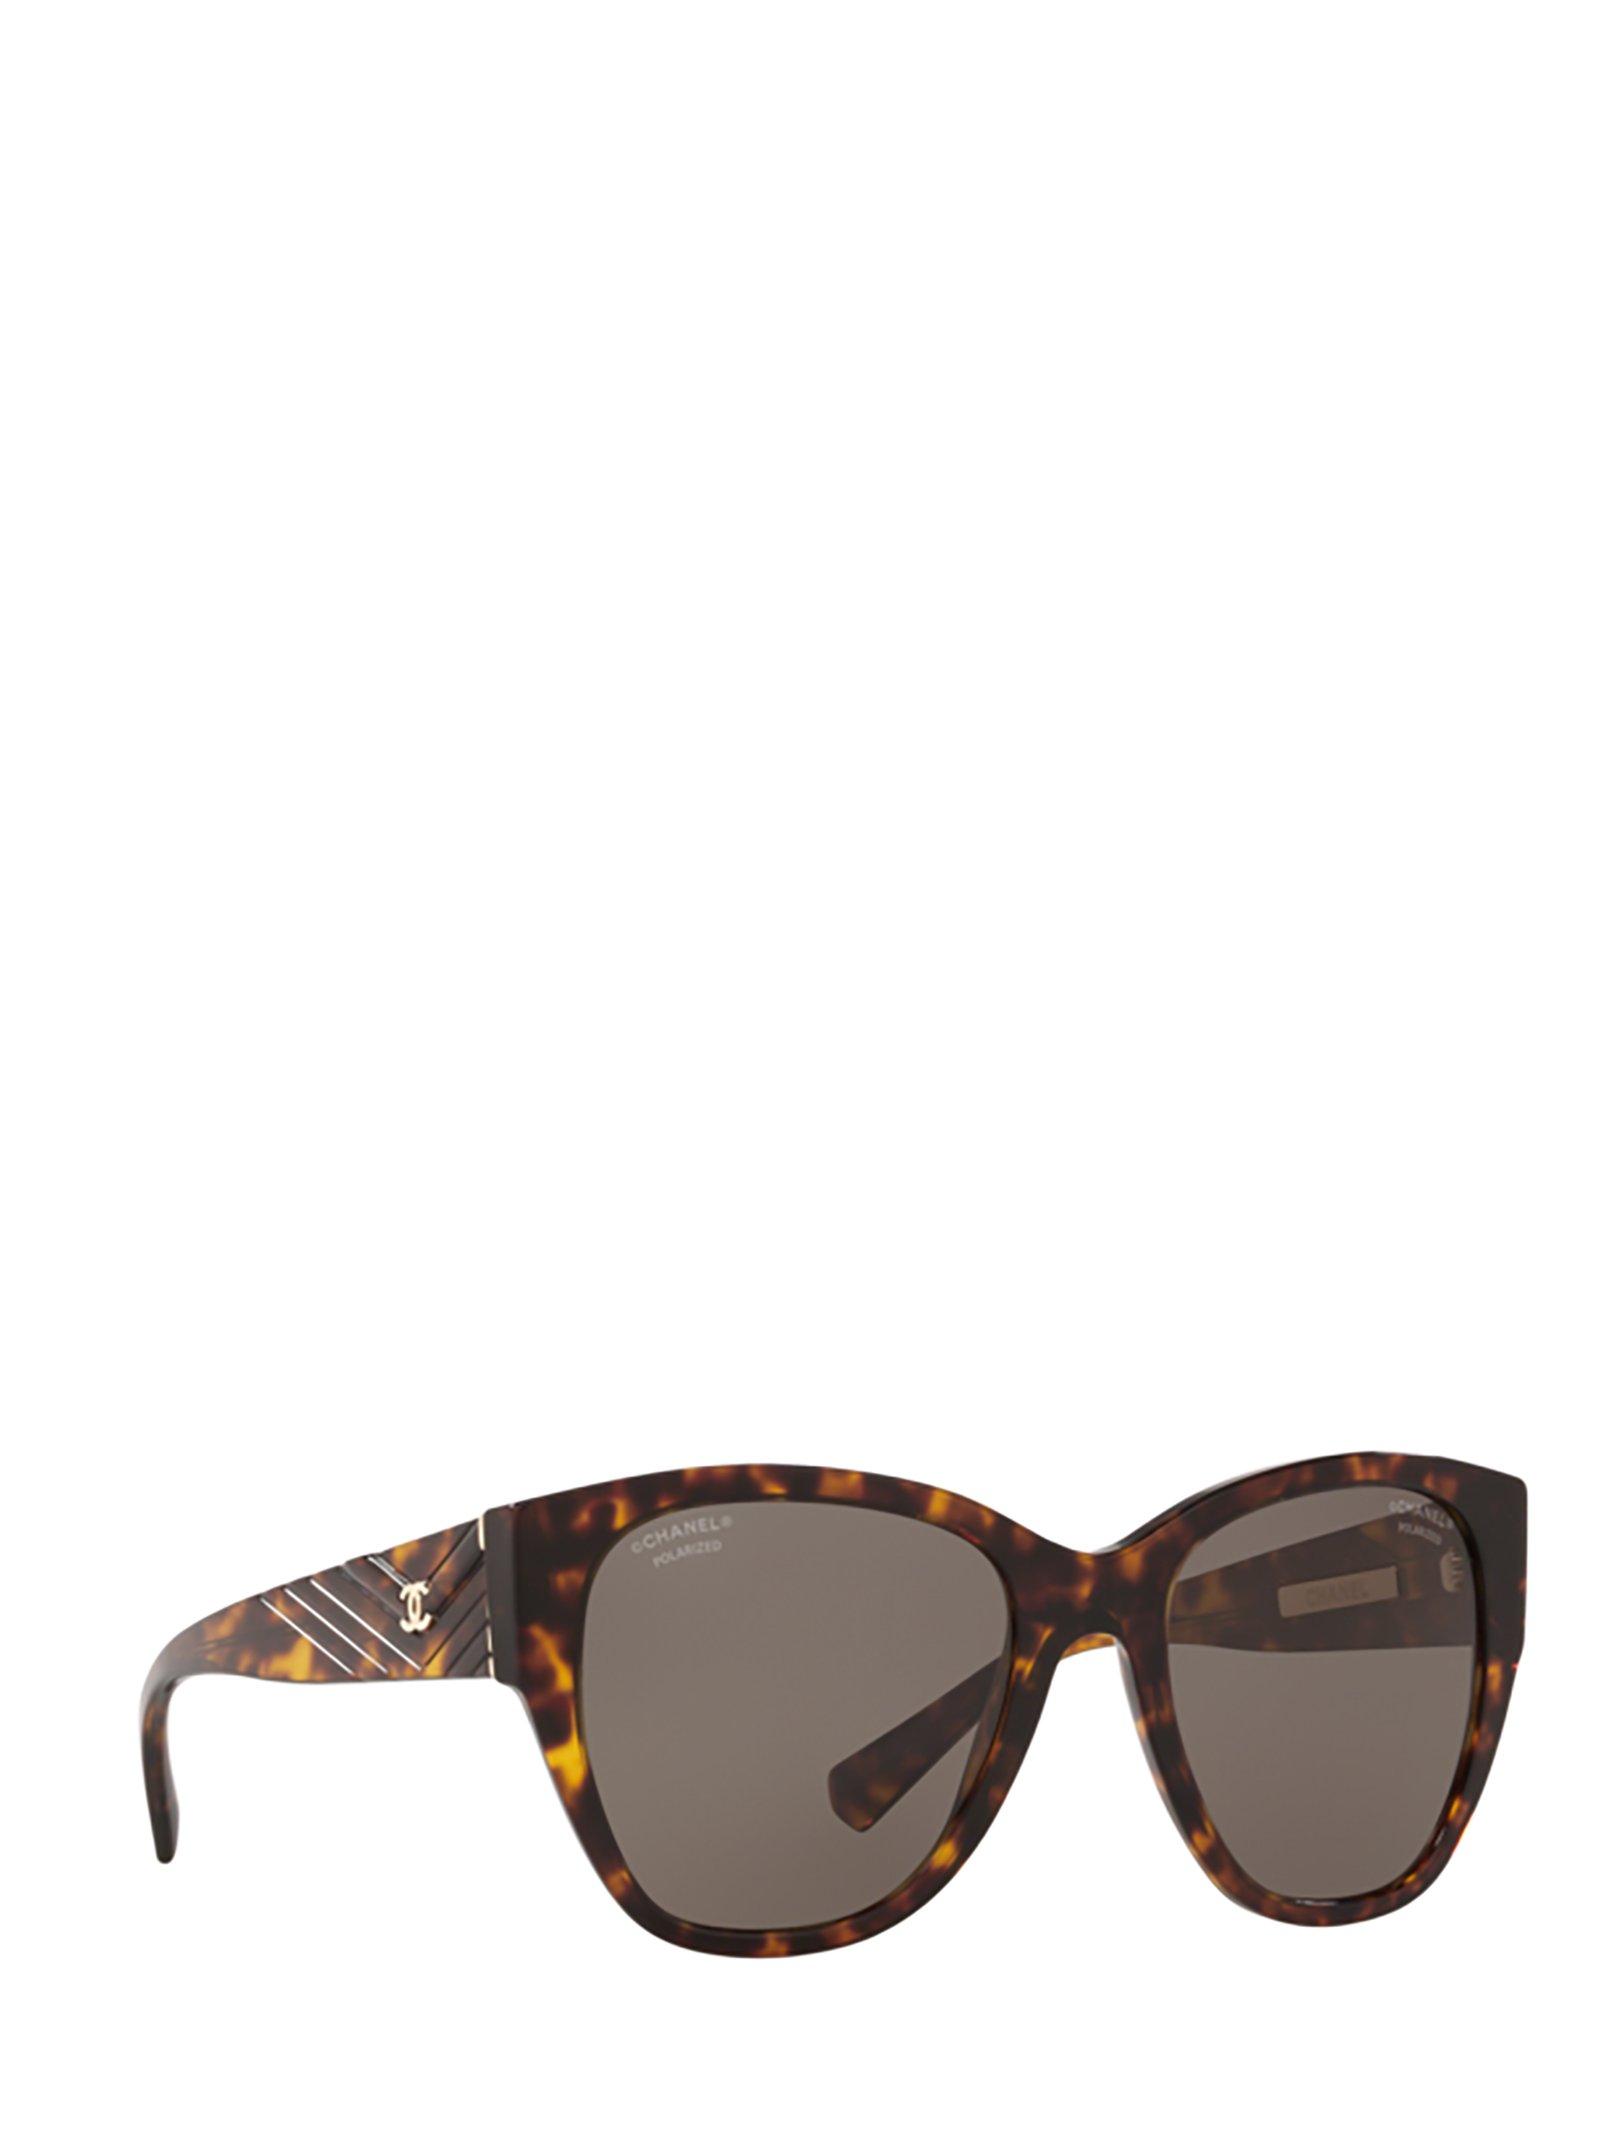 Chanel Sunglass Butterfly Sunglasses Ch5429 in Brown